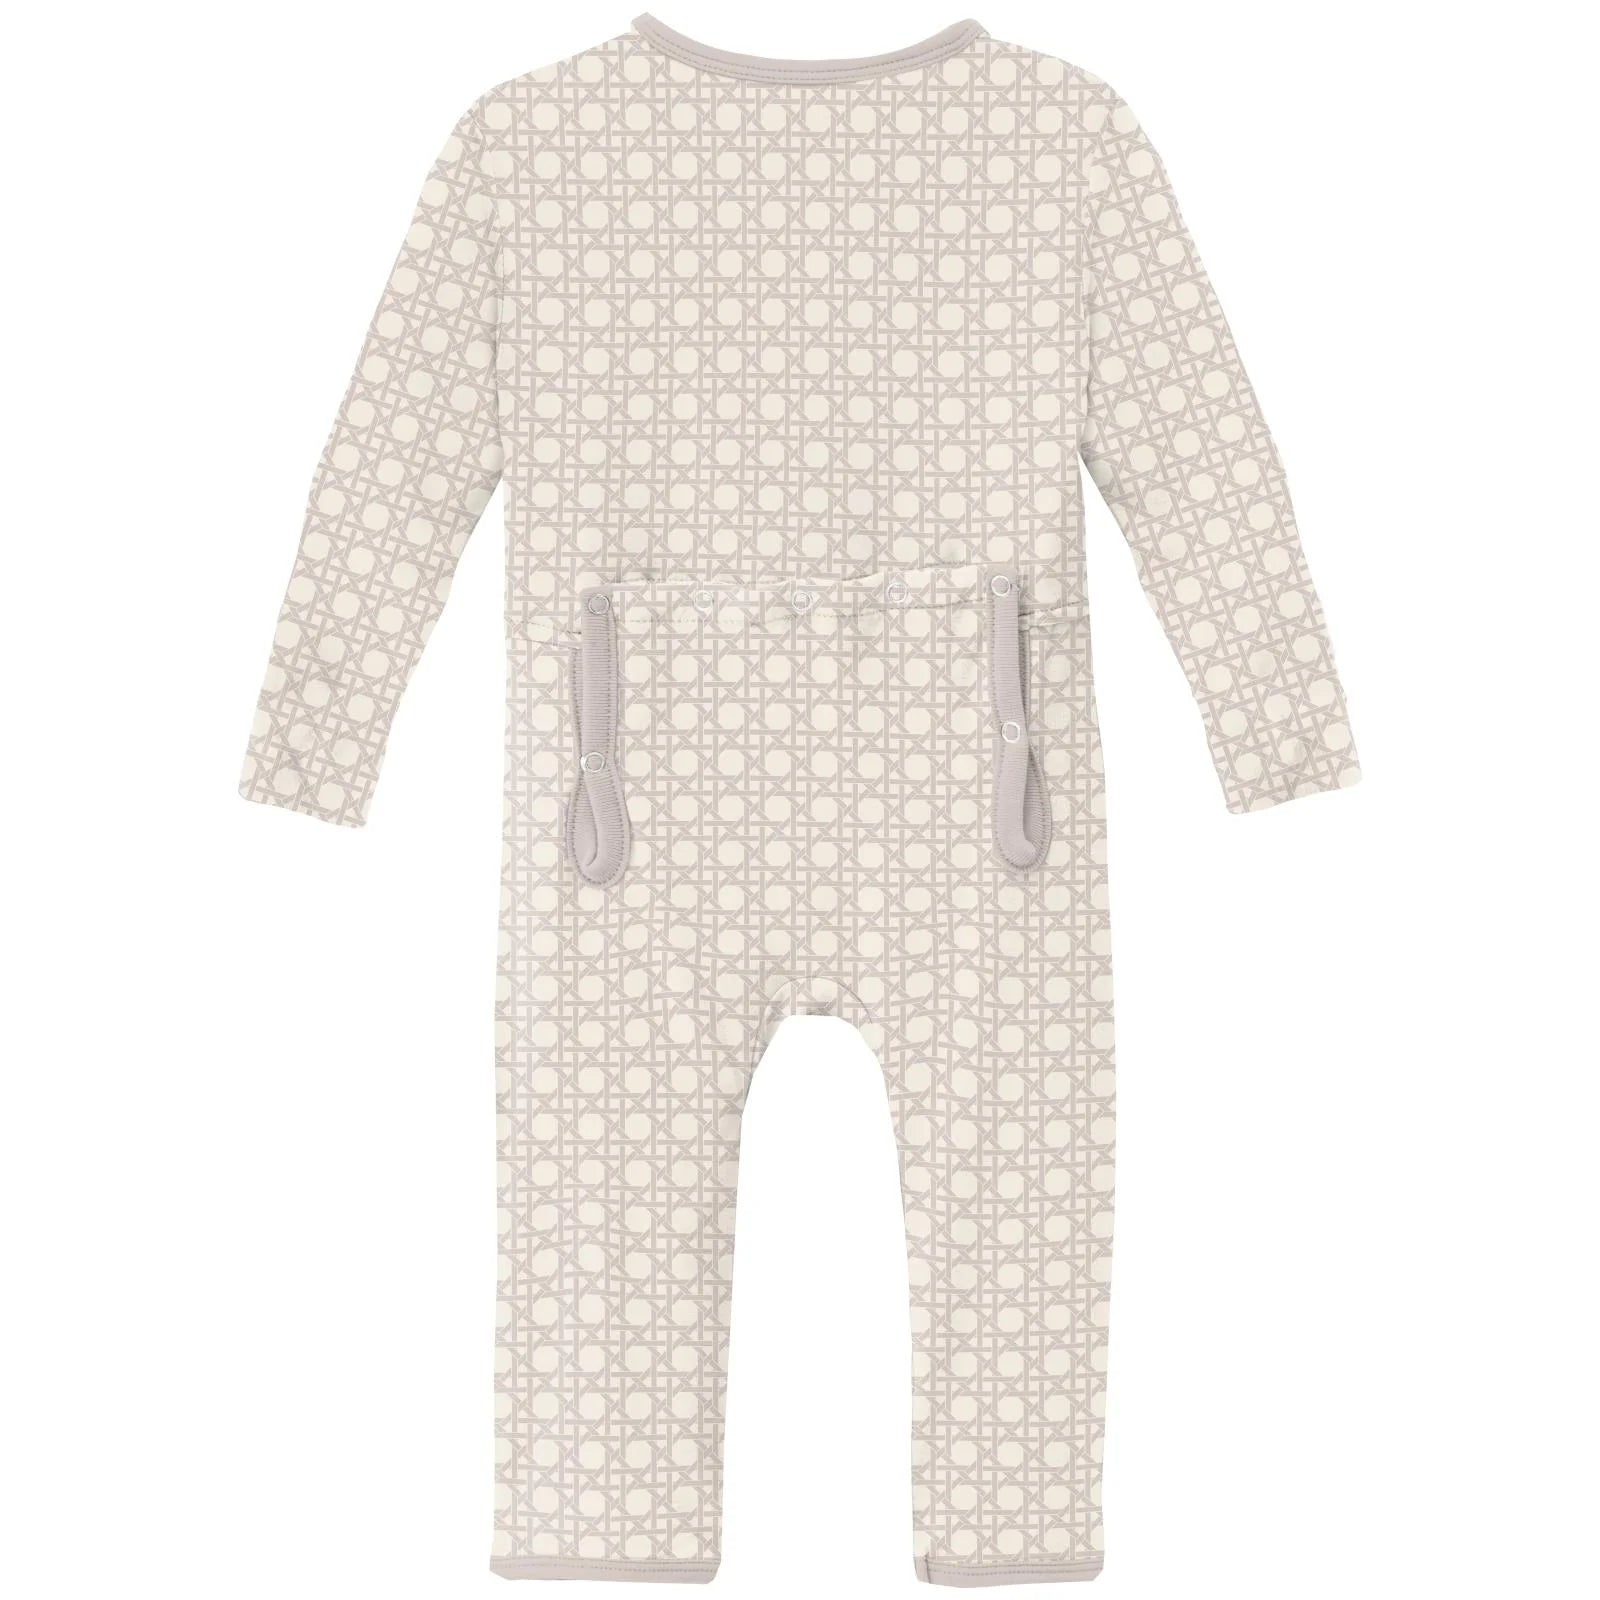 Kickee Pants - Print Coverall with 2 Way Zipper - Latte Wicker